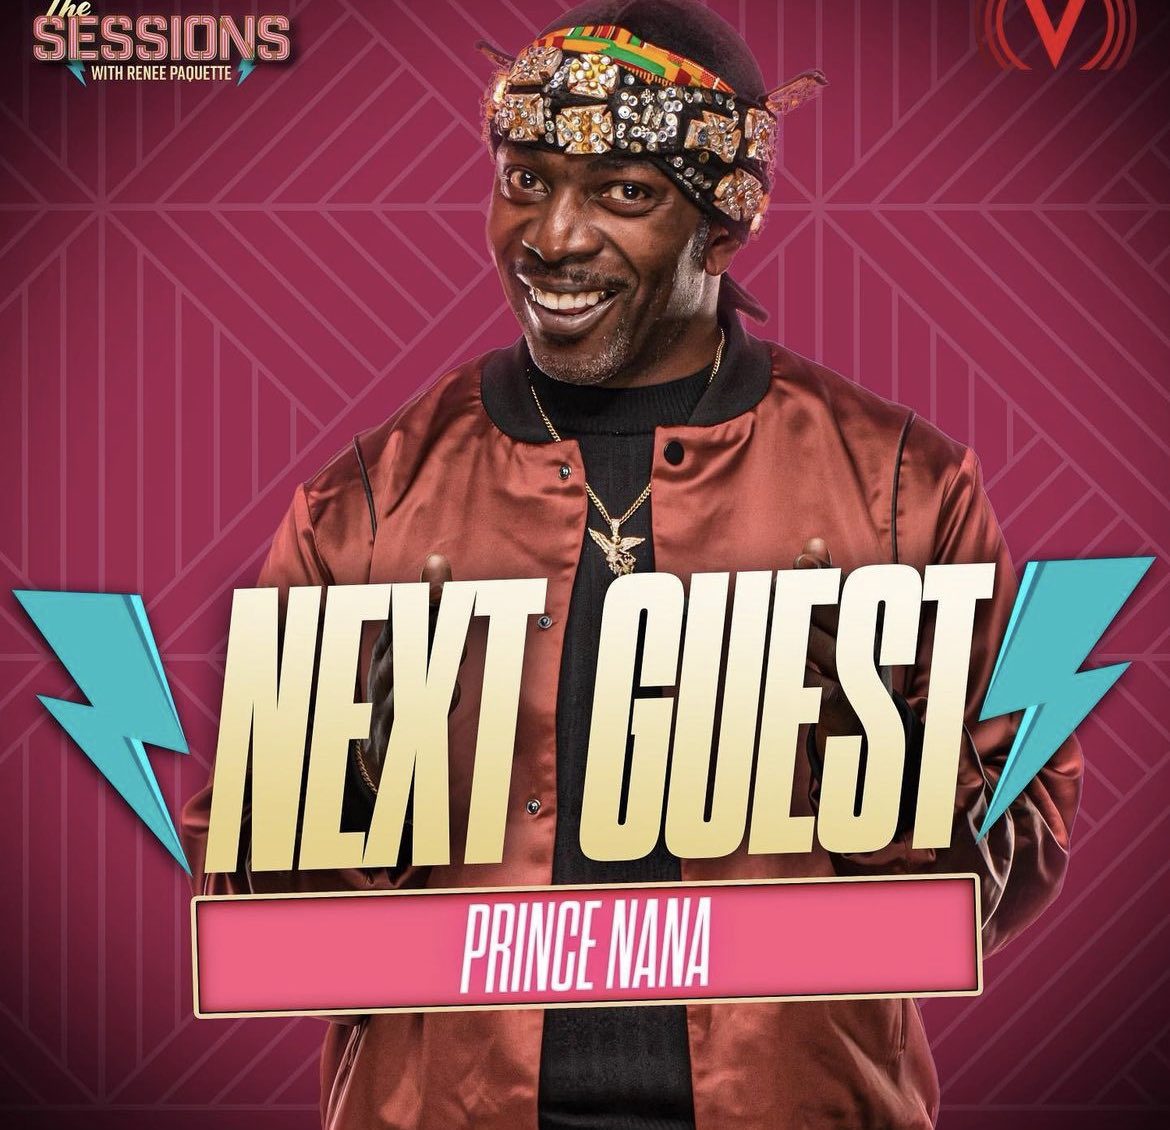 Holy crap @PrinceKingNana is gonna be on #TheSessions with @ReneePaquette this week! 

This is required listening, plebs.